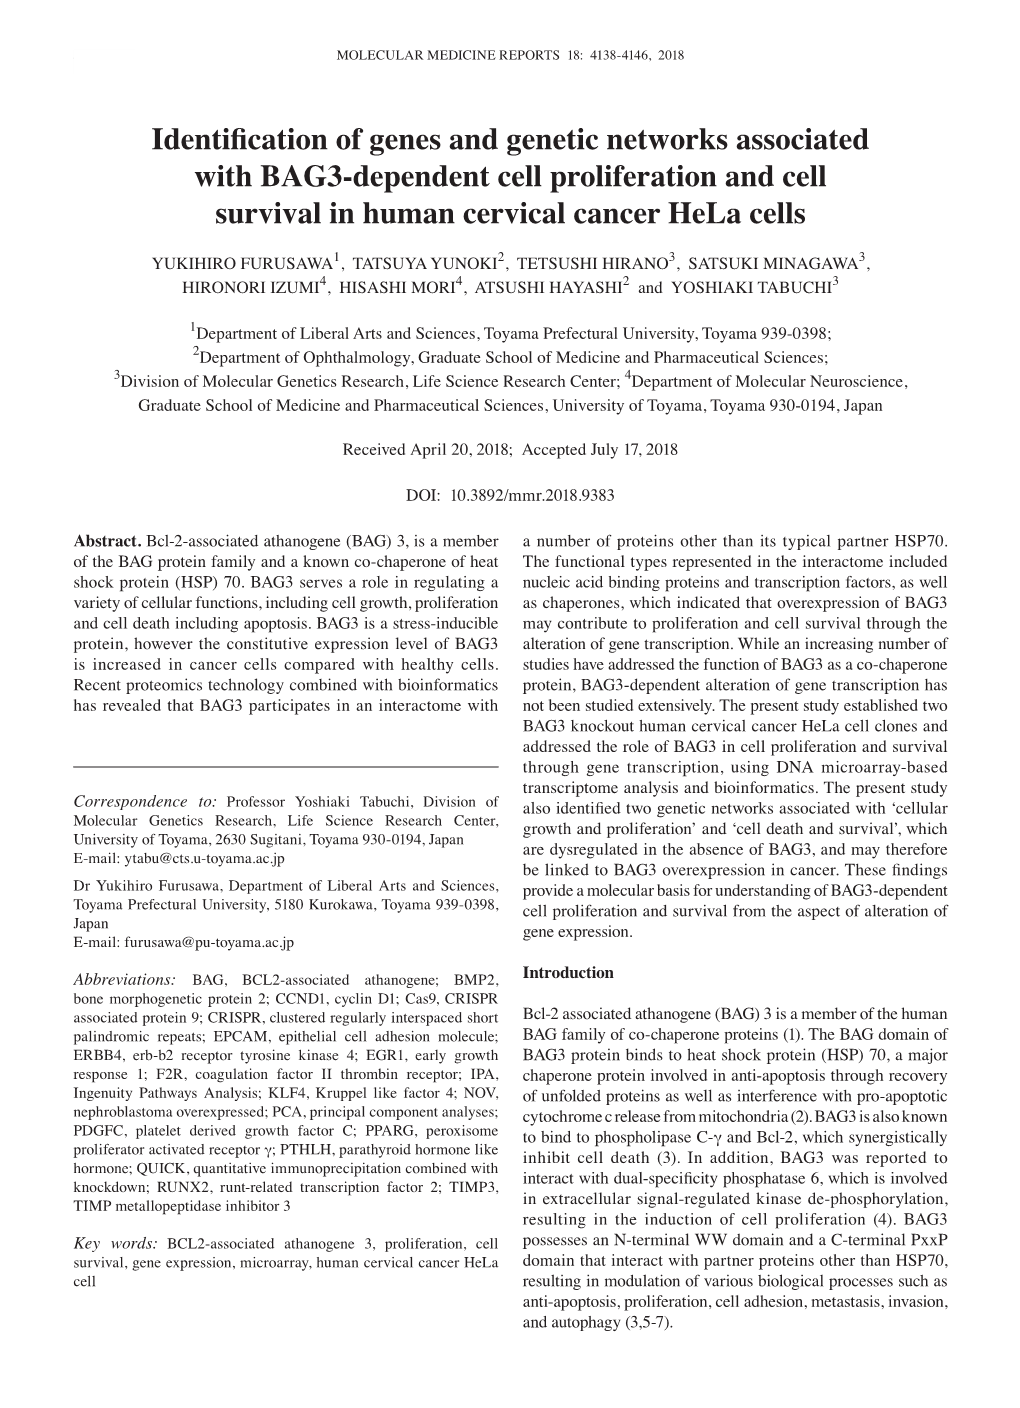 Identification of Genes and Genetic Networks Associated with BAG3‑Dependent Cell Proliferation and Cell Survival in Human Cervical Cancer Hela Cells